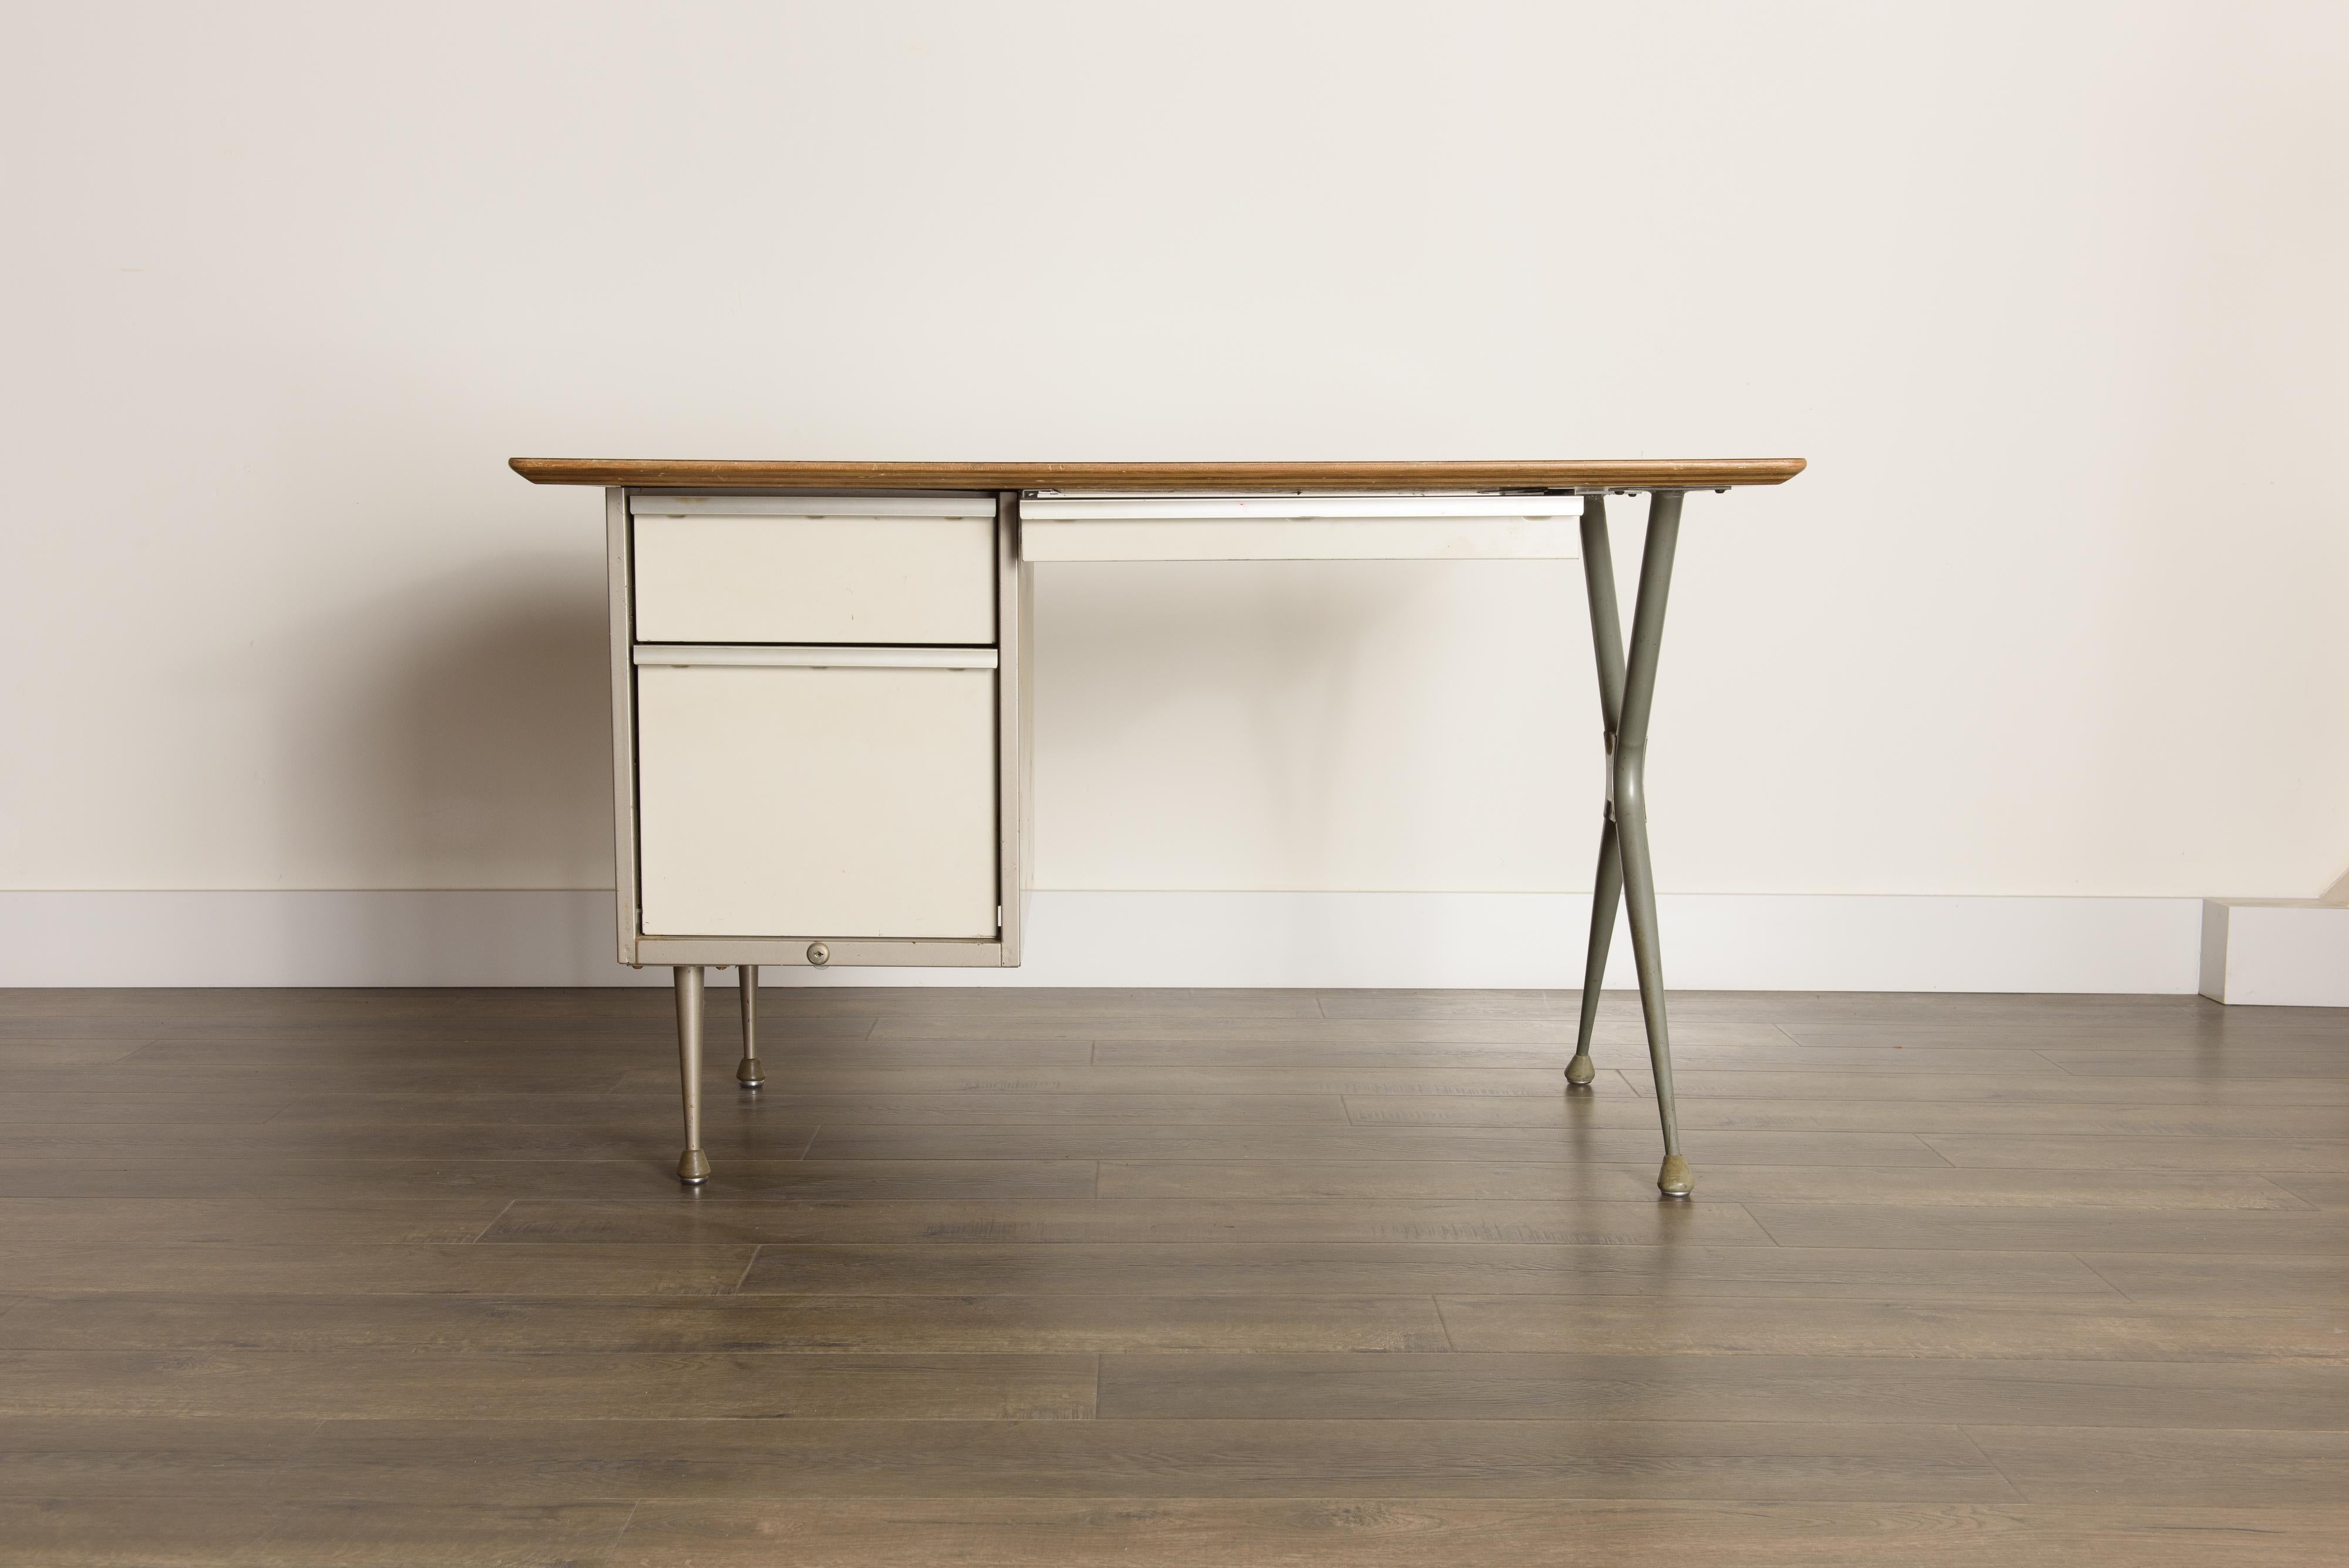 This lovely little Mid-Century Modern industrial desk is by renowned French designer Raymond Loewy and manufactured by Brunswick of Chicago in the 1950s. A collectors piece that would work great in an office, kids room, home office or any